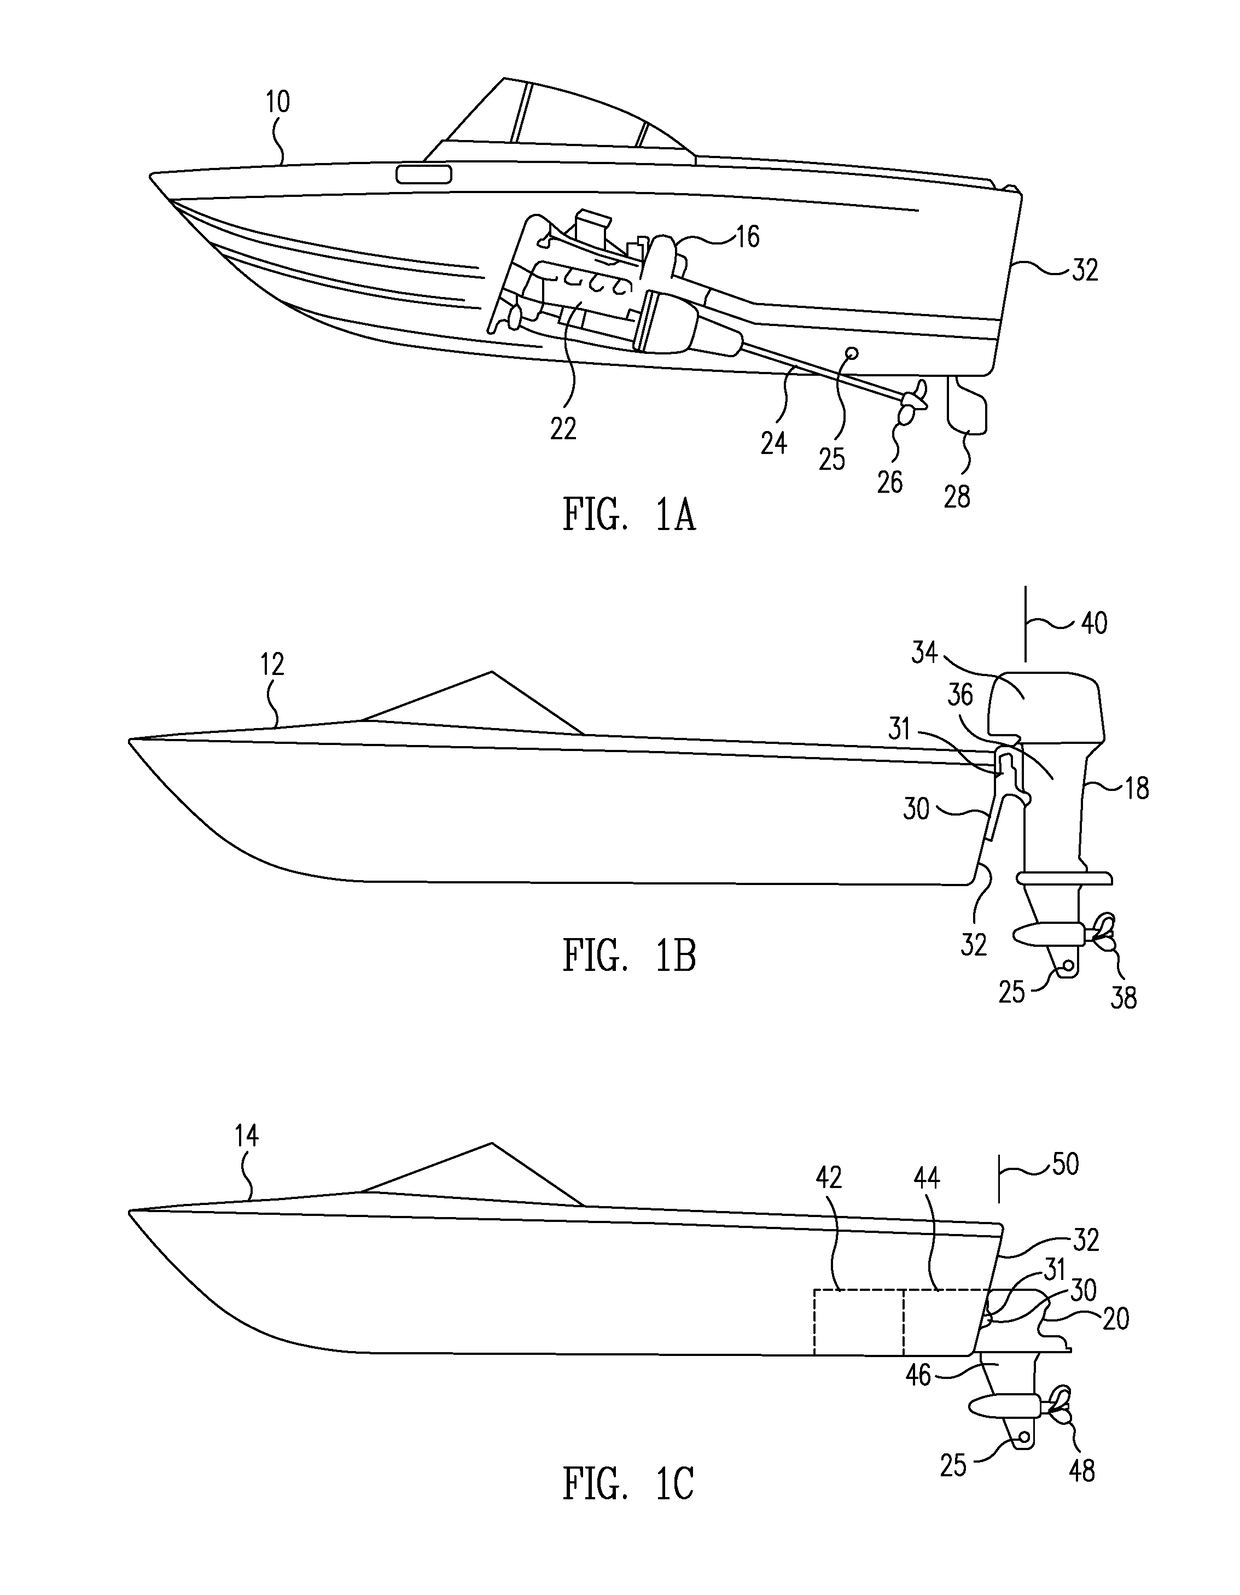 Watercraft protection systems and methods